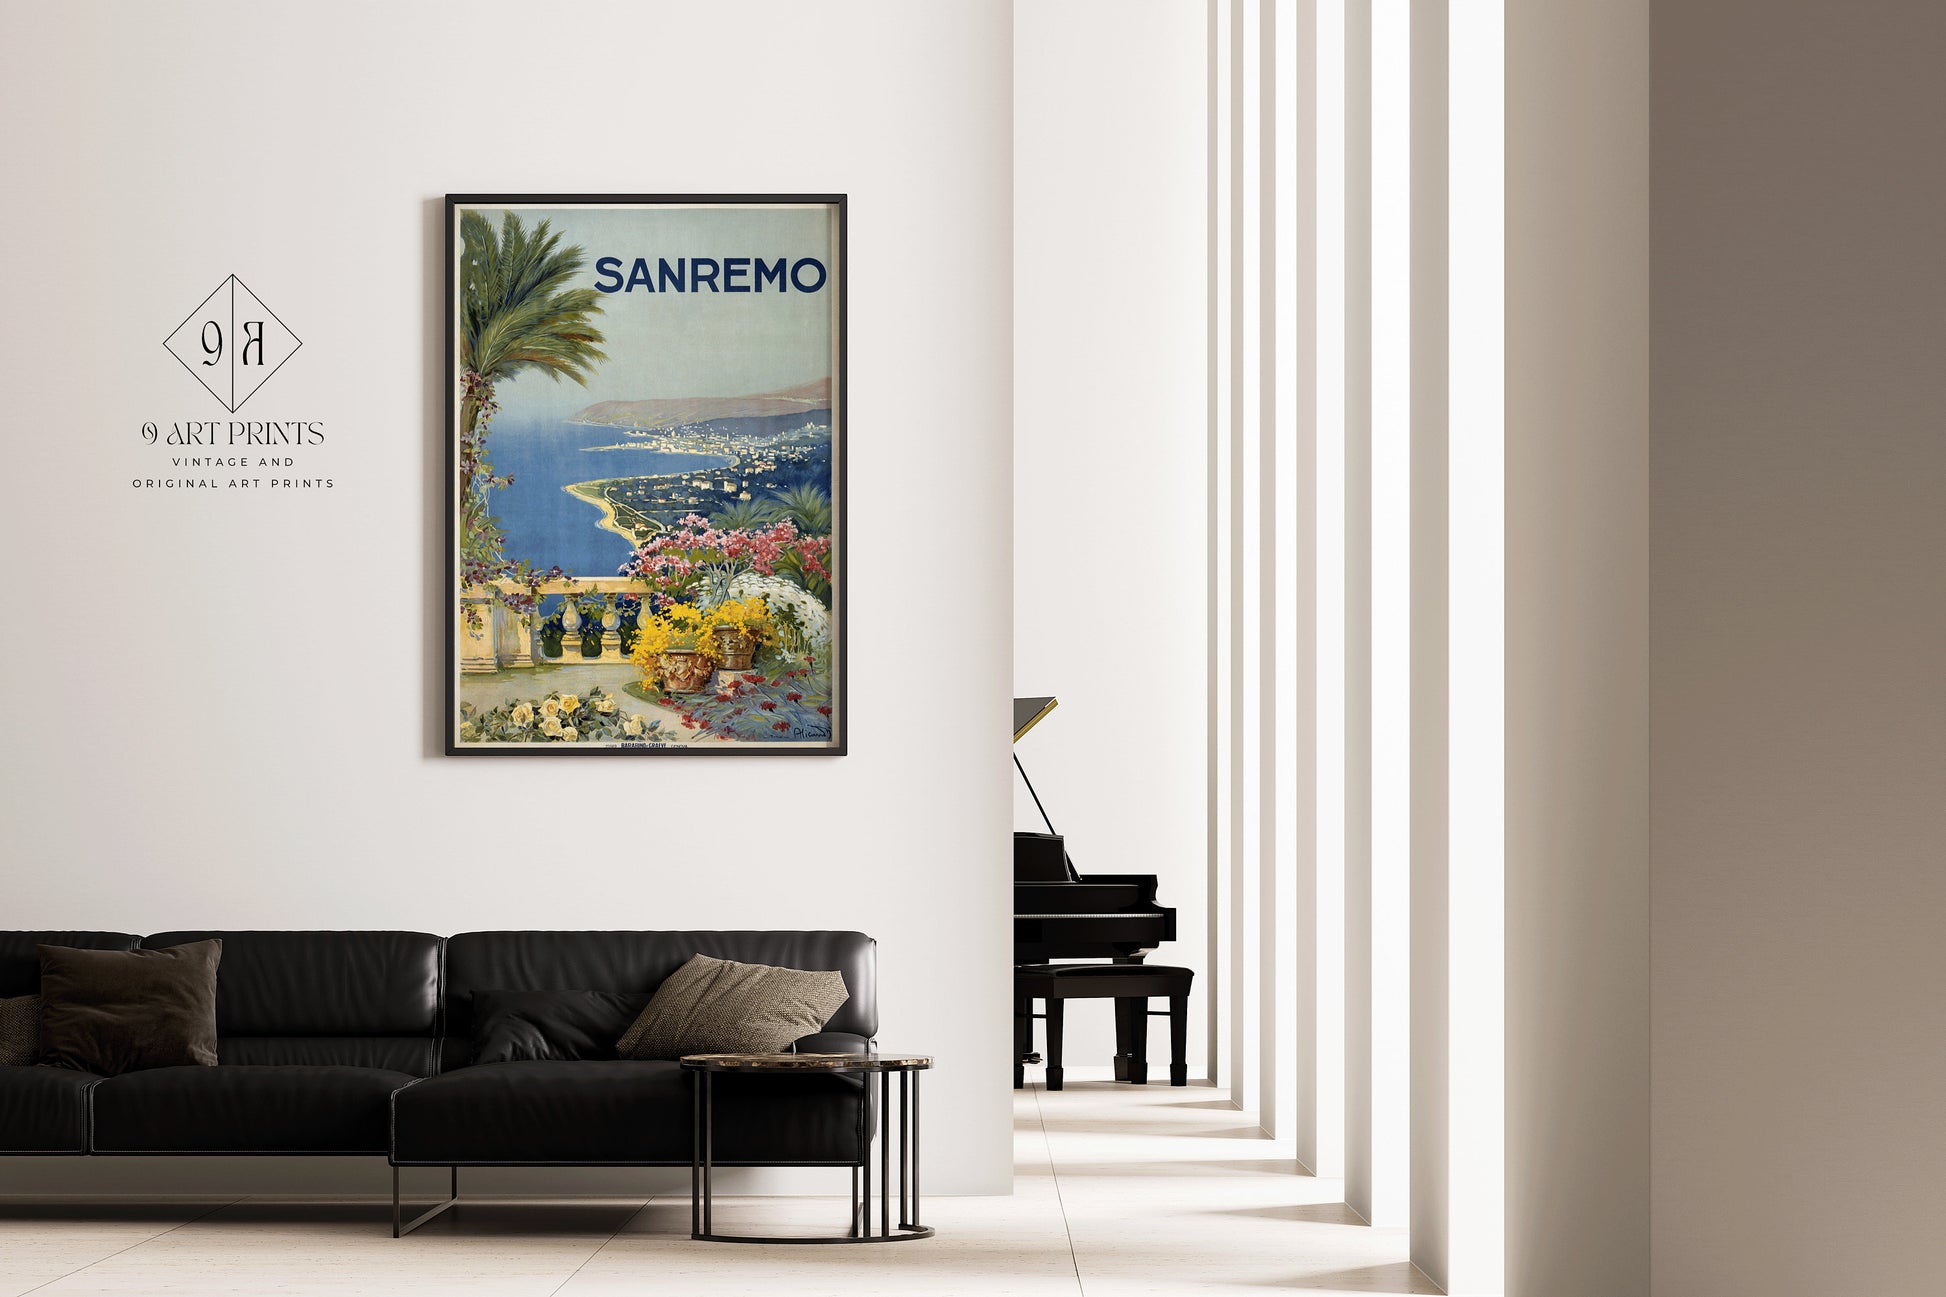 Framed Vintage Travel Poster Sanremo Italy Retro Art Print Exhibition Poster Portrait Modern Gallery Framed Ready to Hang Home Office Decor